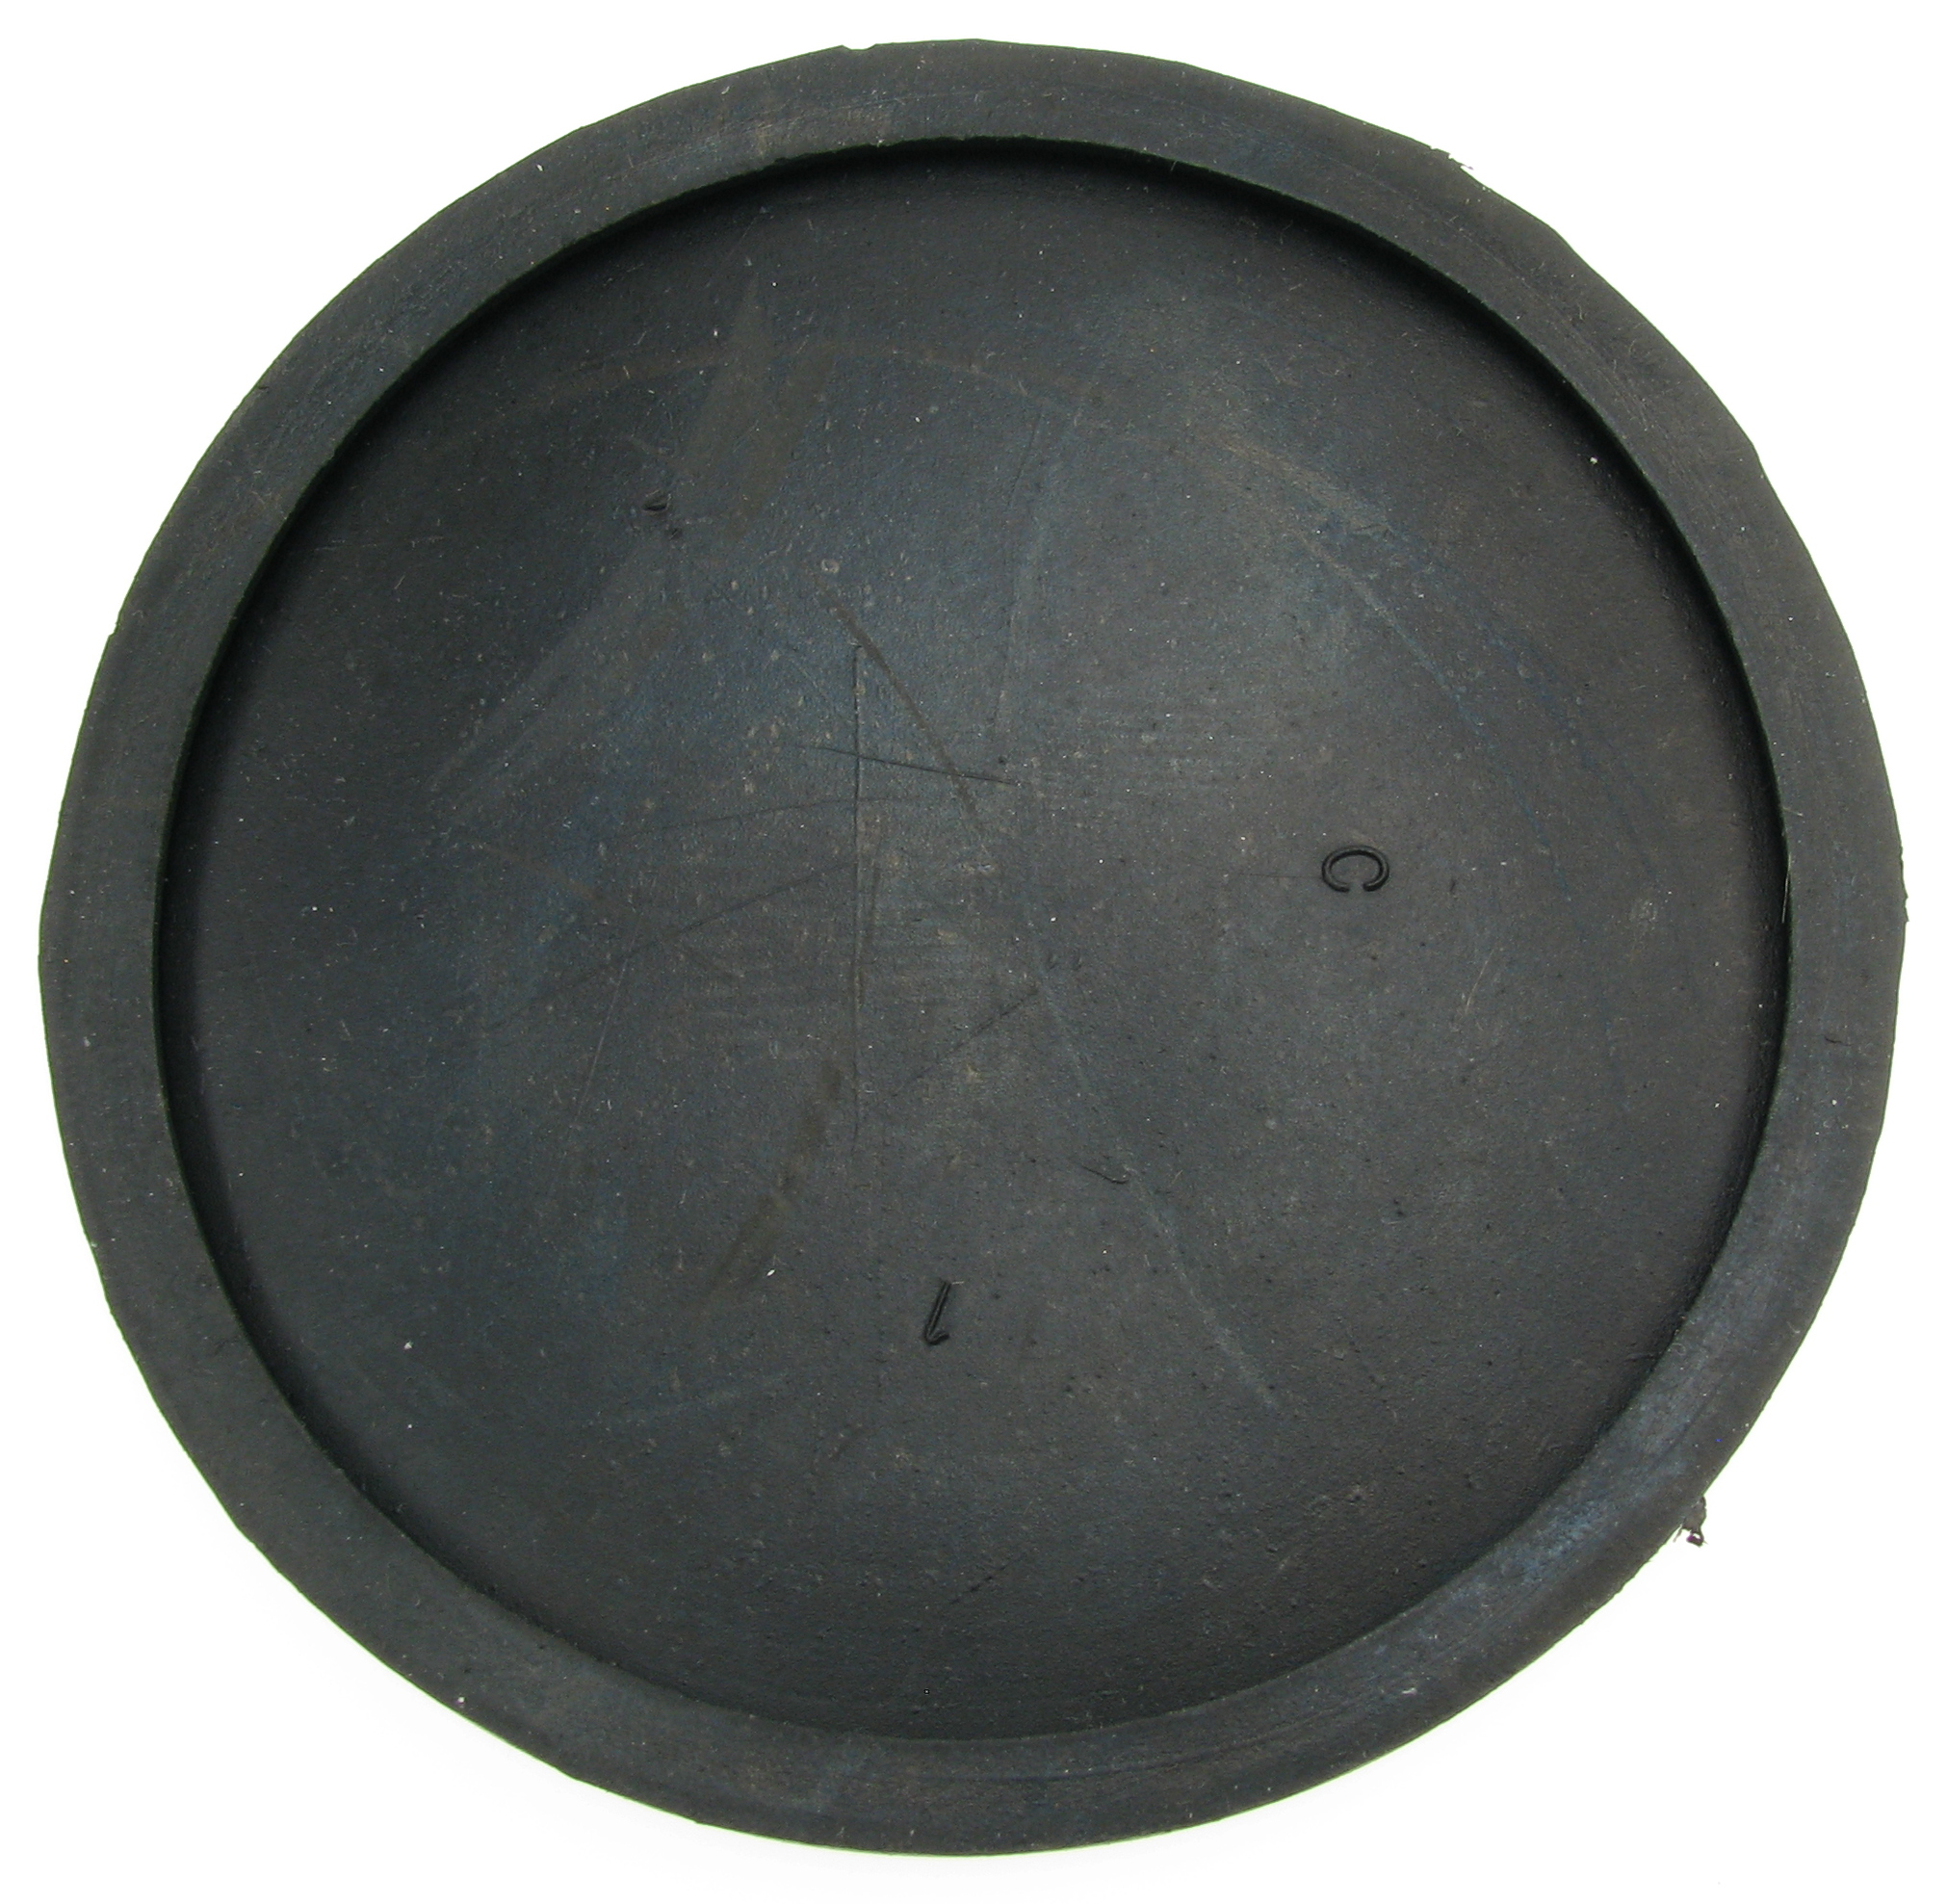 Gasket for drum 4.3 and 2.0 litres Lortone